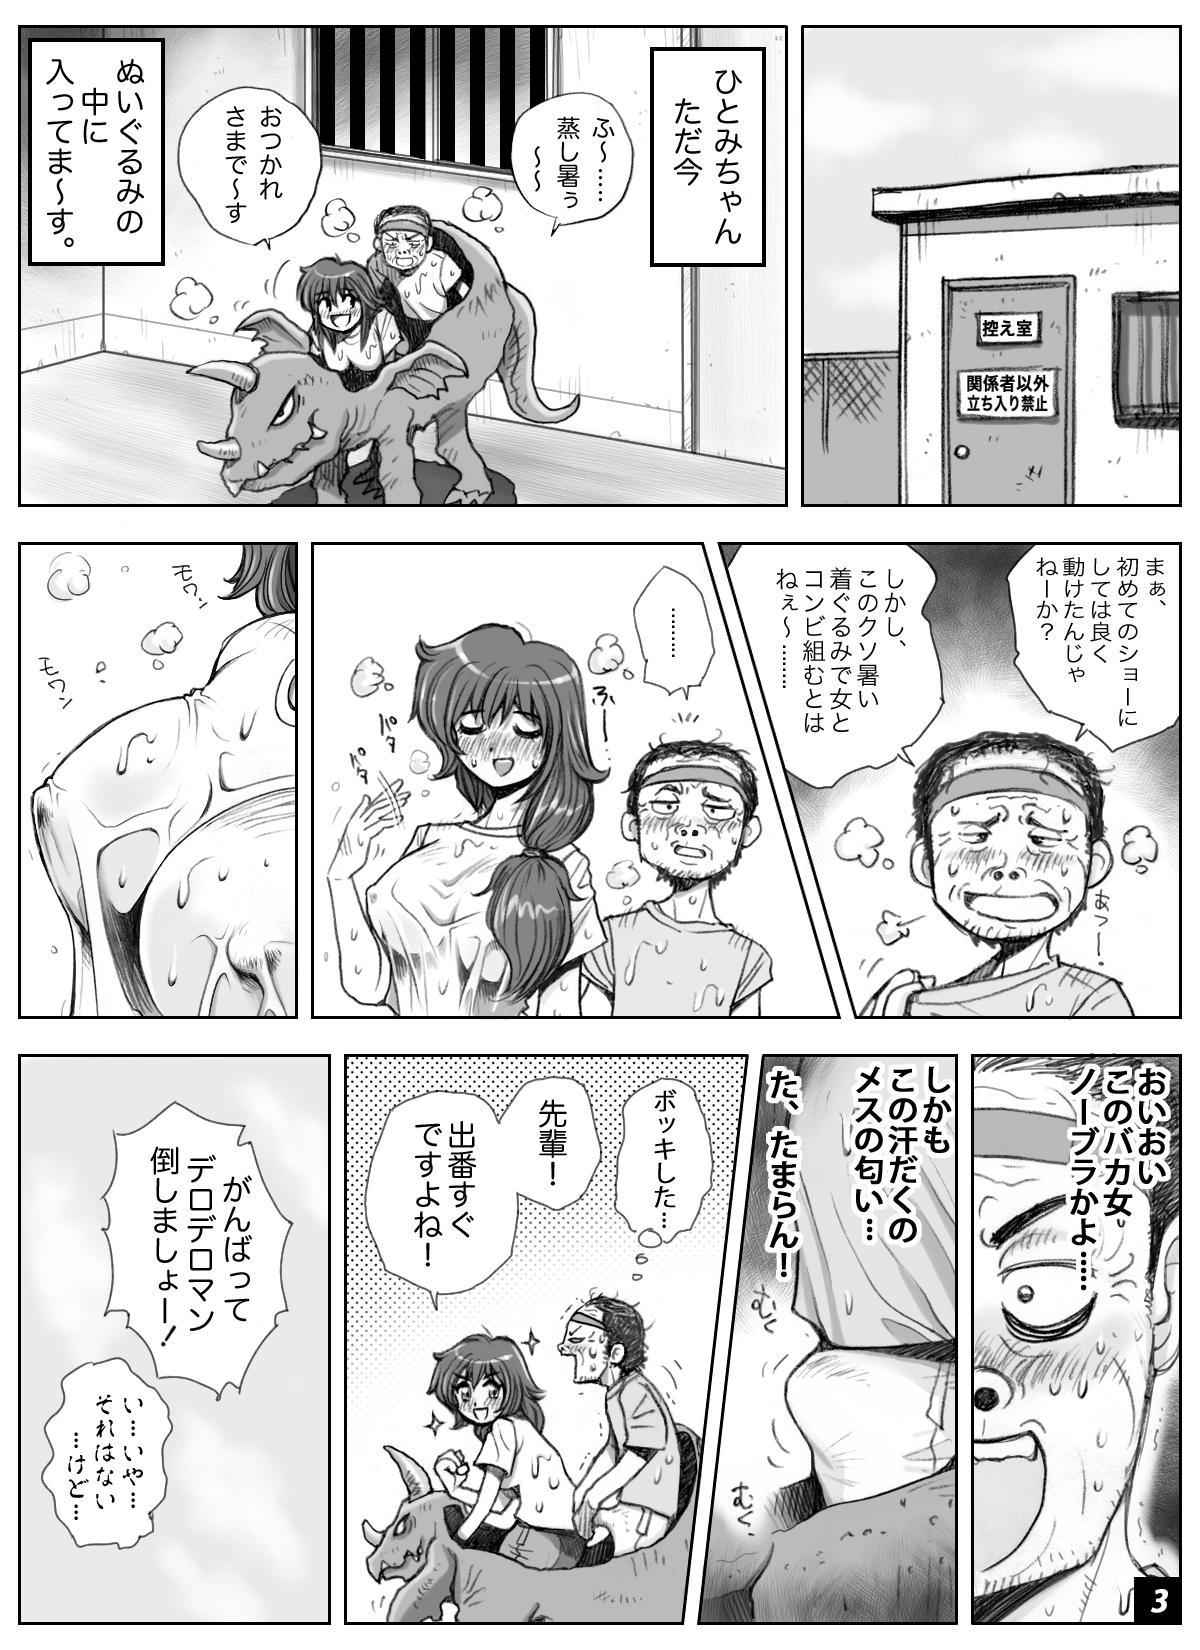 All ikeikeフリーター ひとみちゃん Vol.6 Putinha - Page 3